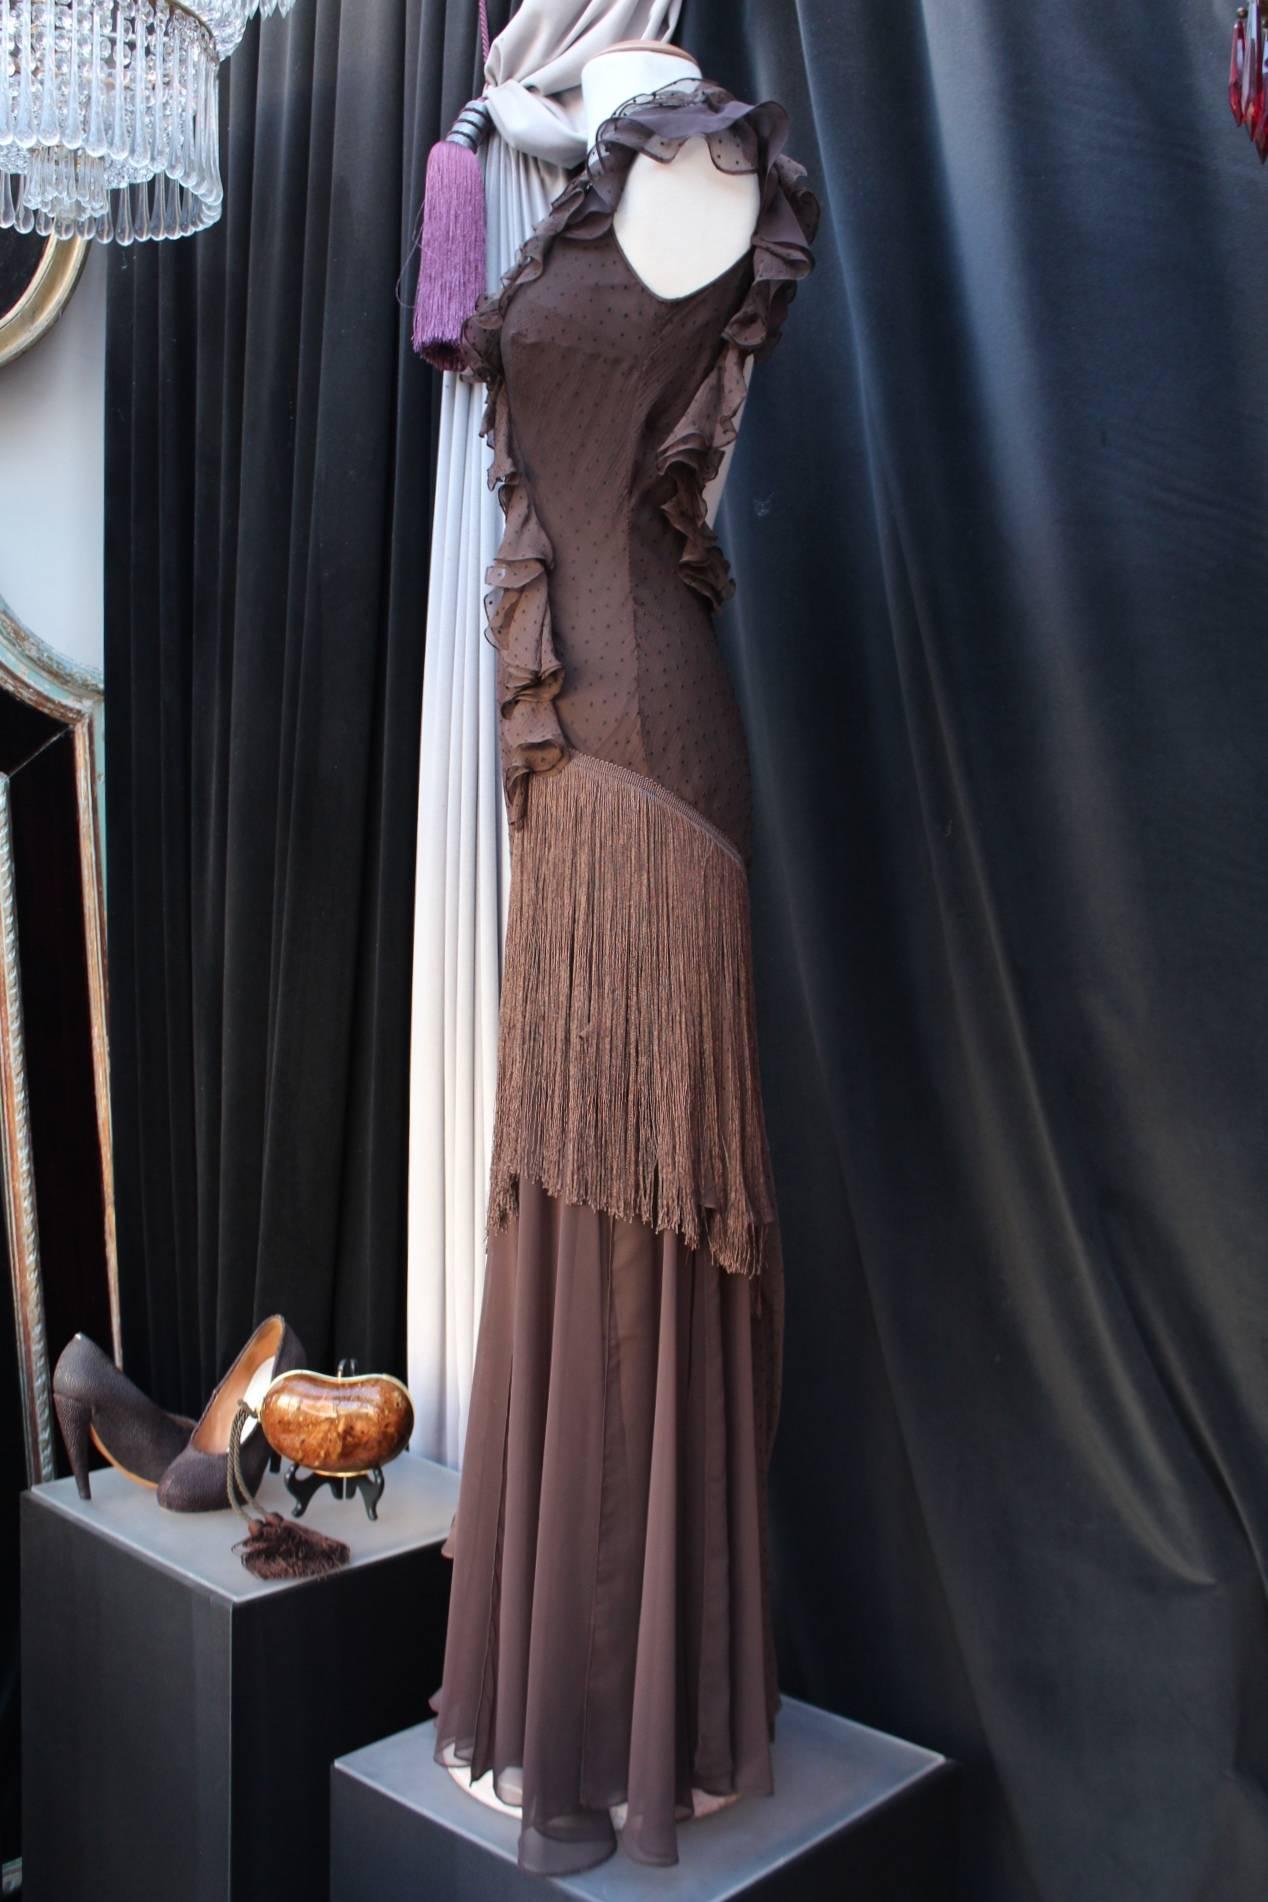 CHRISTIAN DIOR BOUTIQUE (Paris) Long evening dress constructed with brown silk muslin chiffon adorned with fringes and brown silk embroidered dots. 

The dress is constructed with thin straps and band of ruffles intersecting and joining the bias